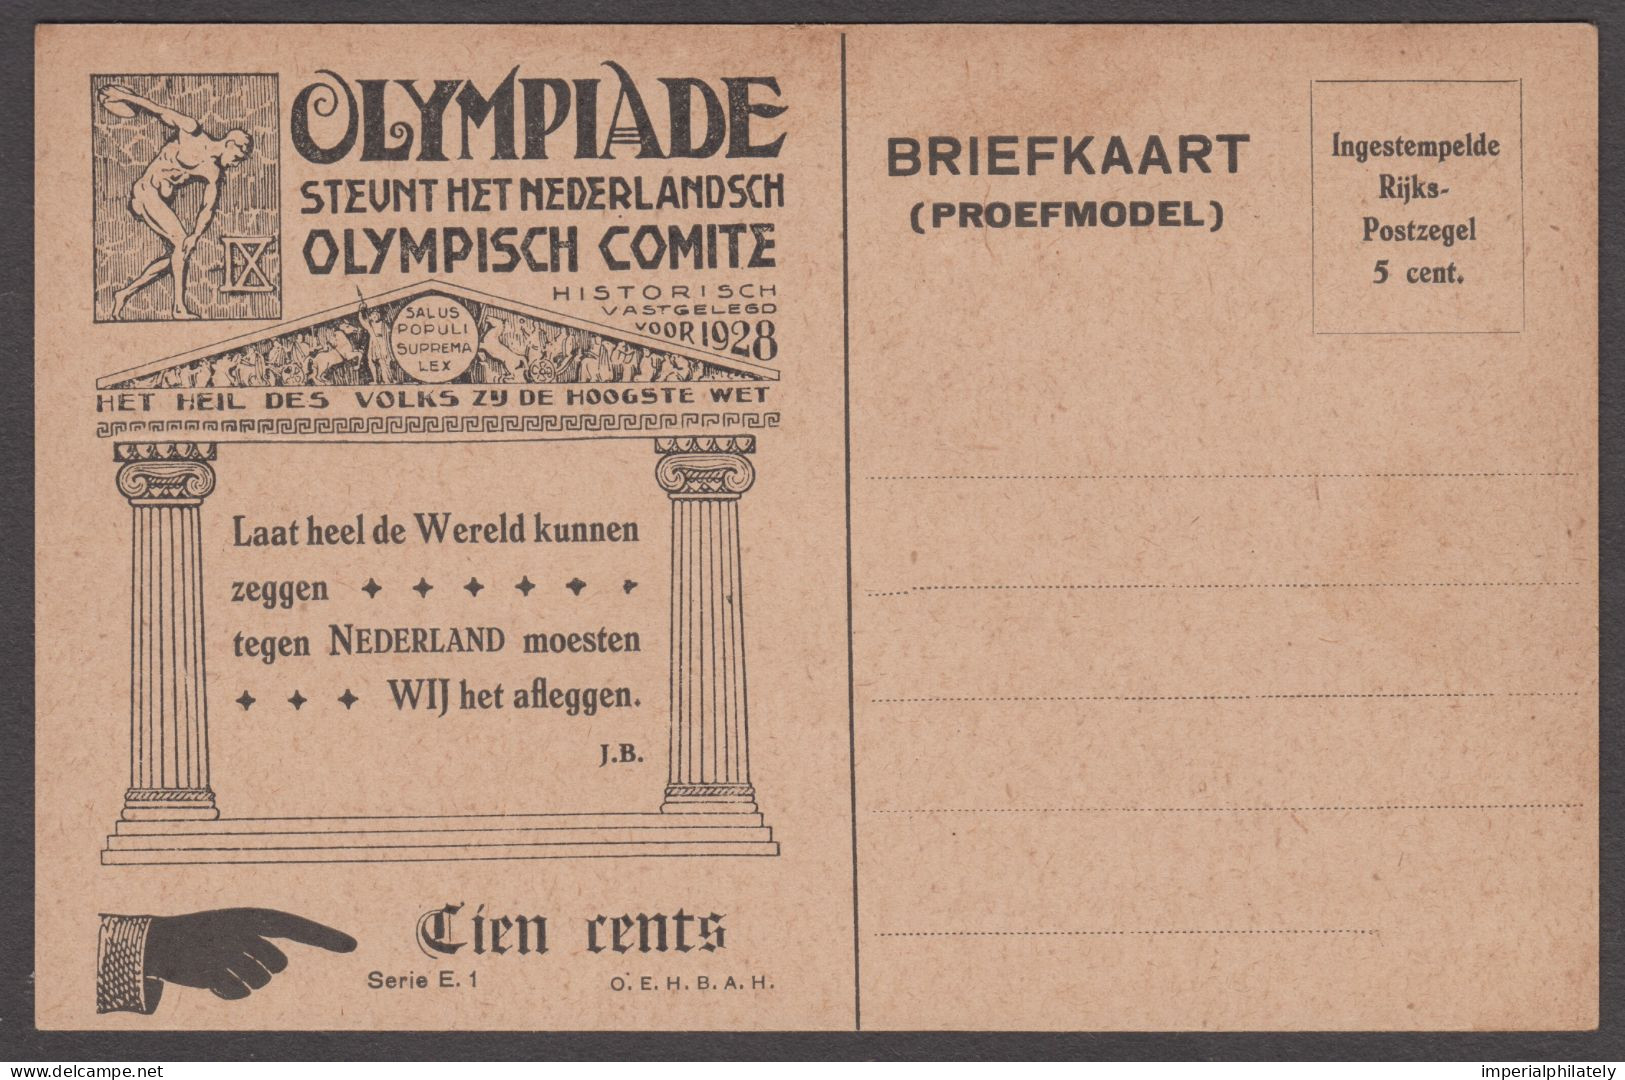 1928 Amsterdam 5c Postal Stationery Card Proof ("proefmodel") By Huygens, Series E.1 - Estate 1928: Amsterdam